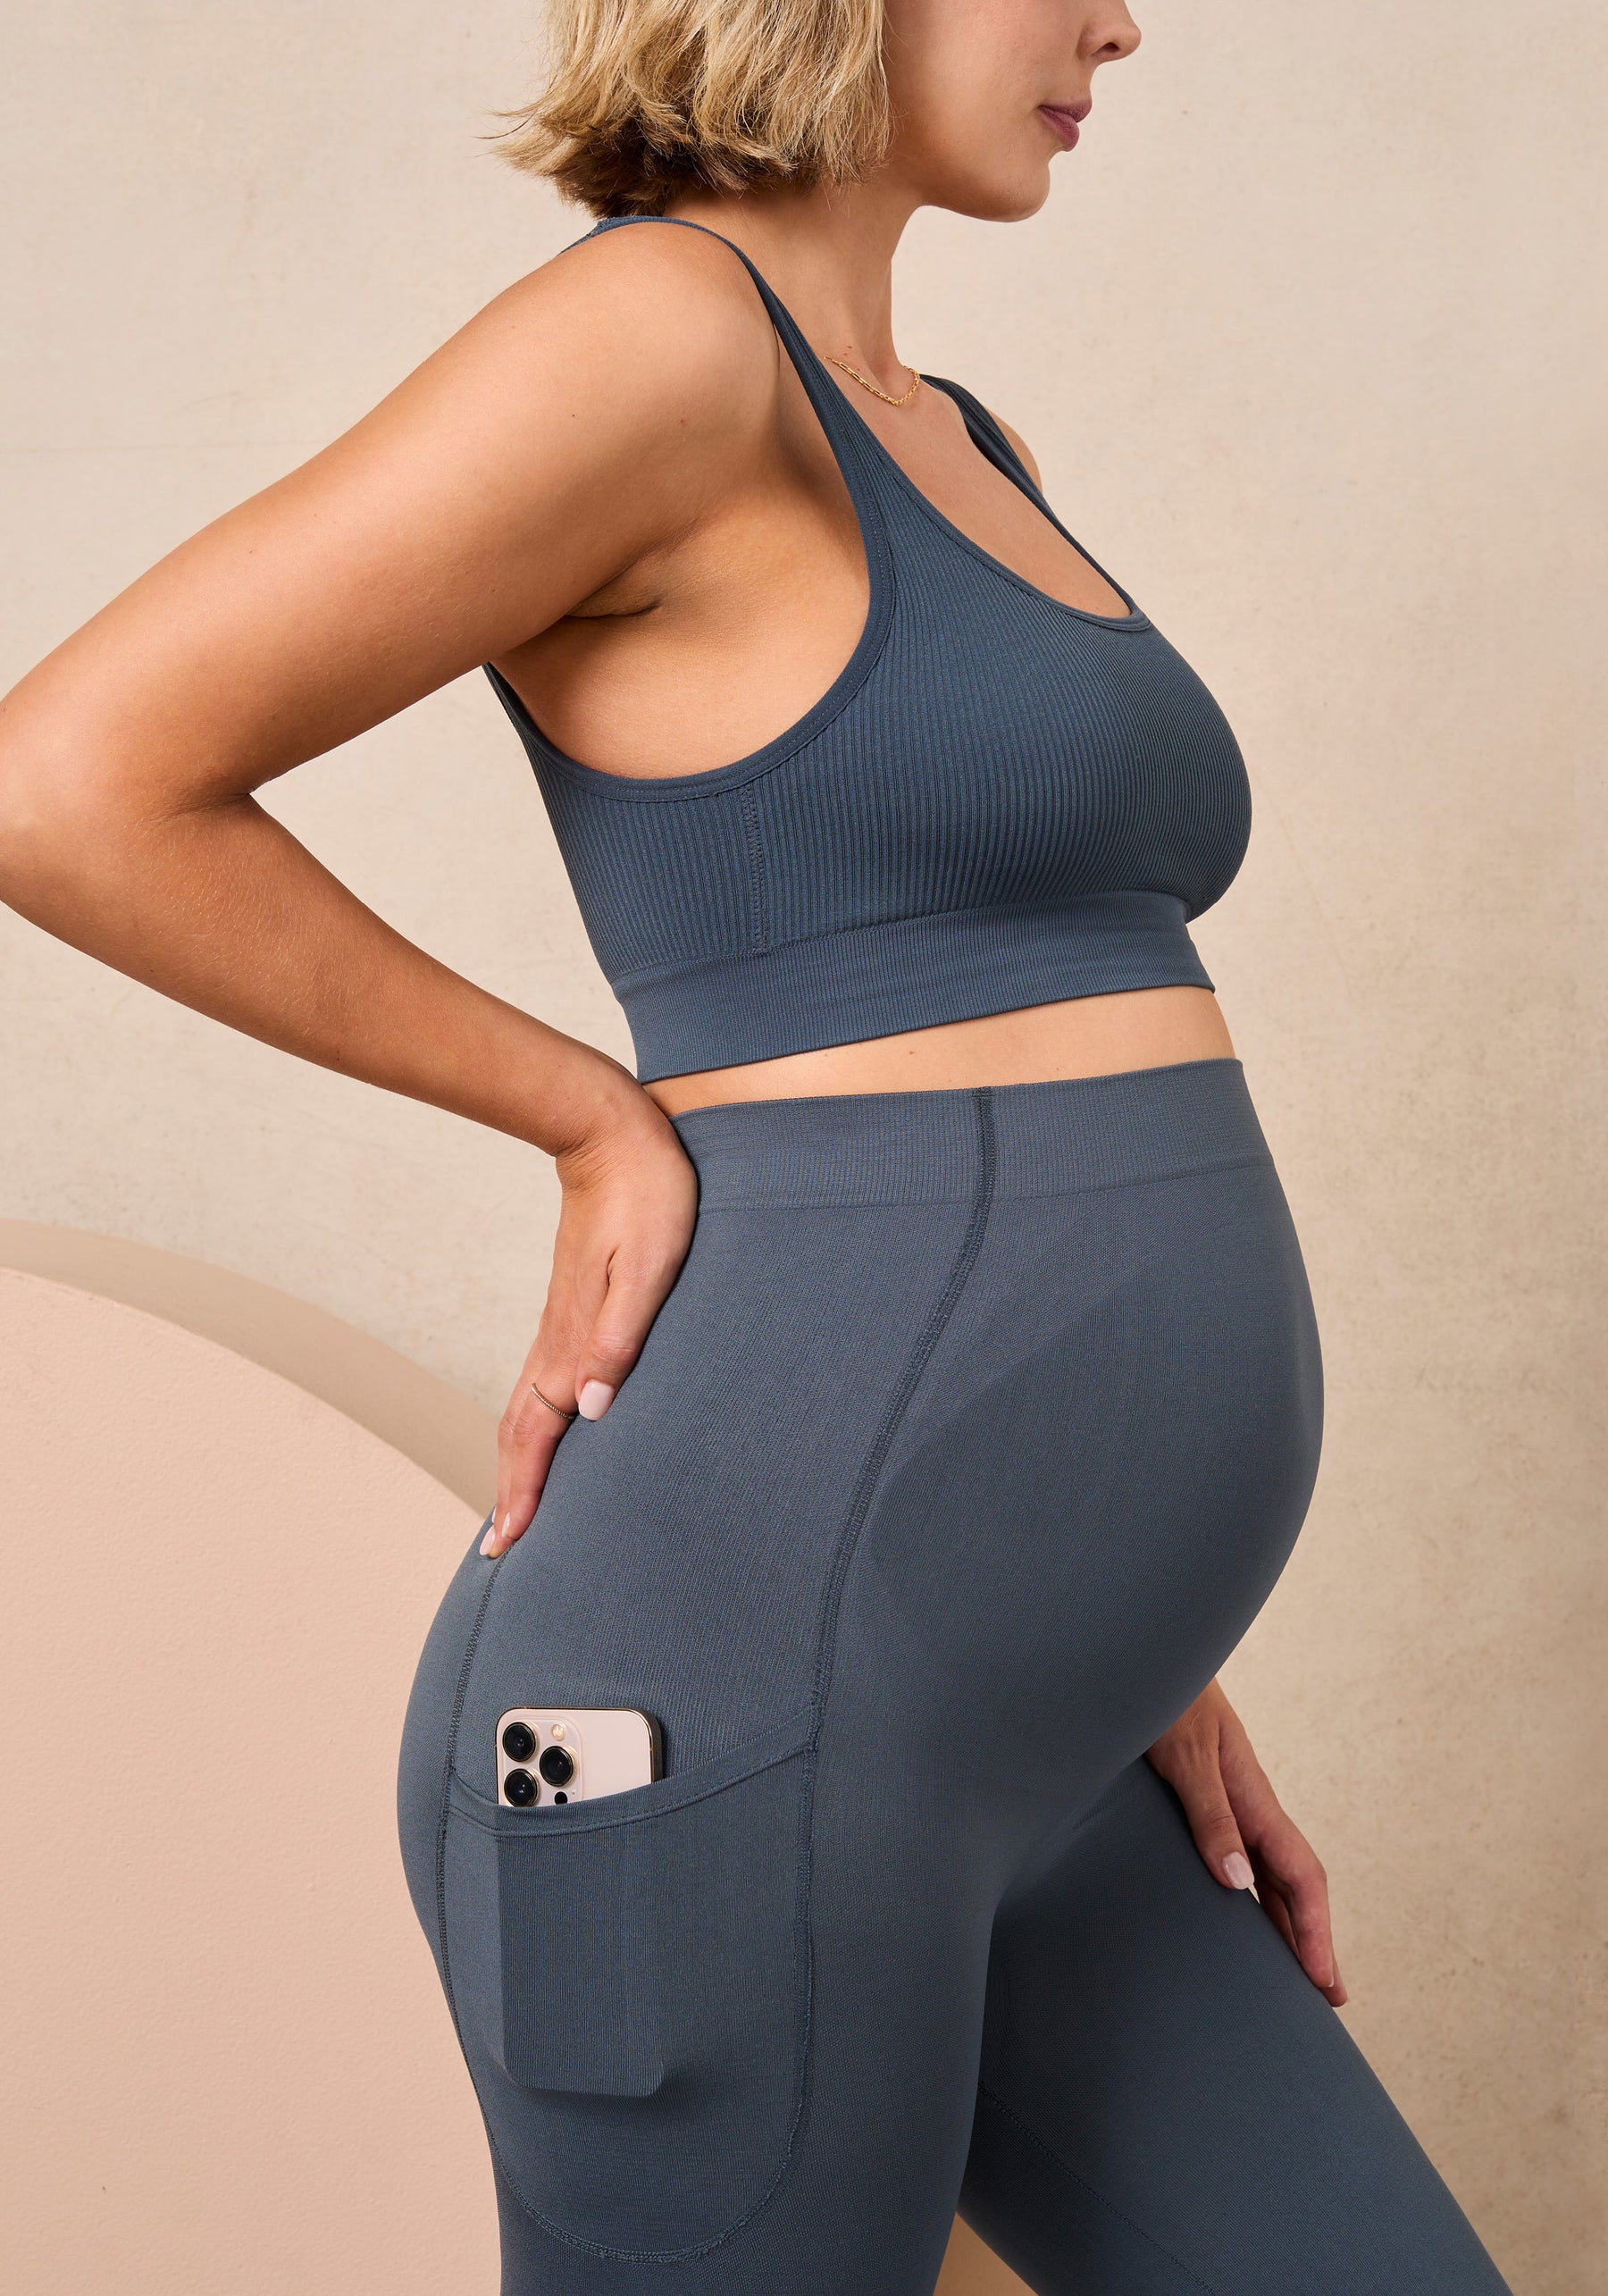 Maternity Lingerie & Tights - The latest trends